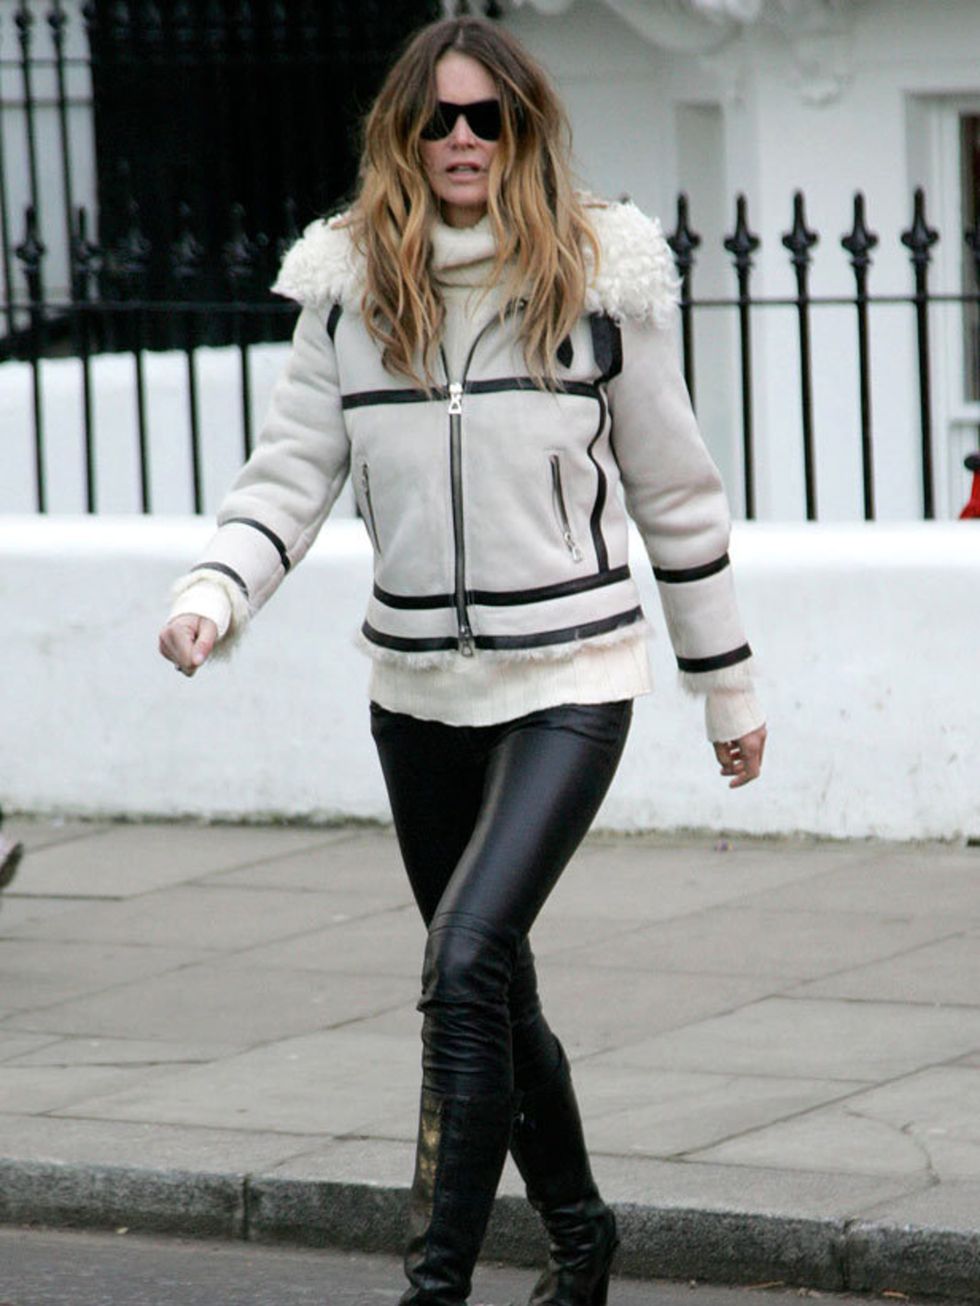 <p>Elle Macpherson wears an <a href="http://www.elleuk.com/catwalk/collections/isabel-marant/spring-summer-2011/collection">Isabel Marant</a> shearling suede jacket and boots for the school run, 25 November 2010 </p>